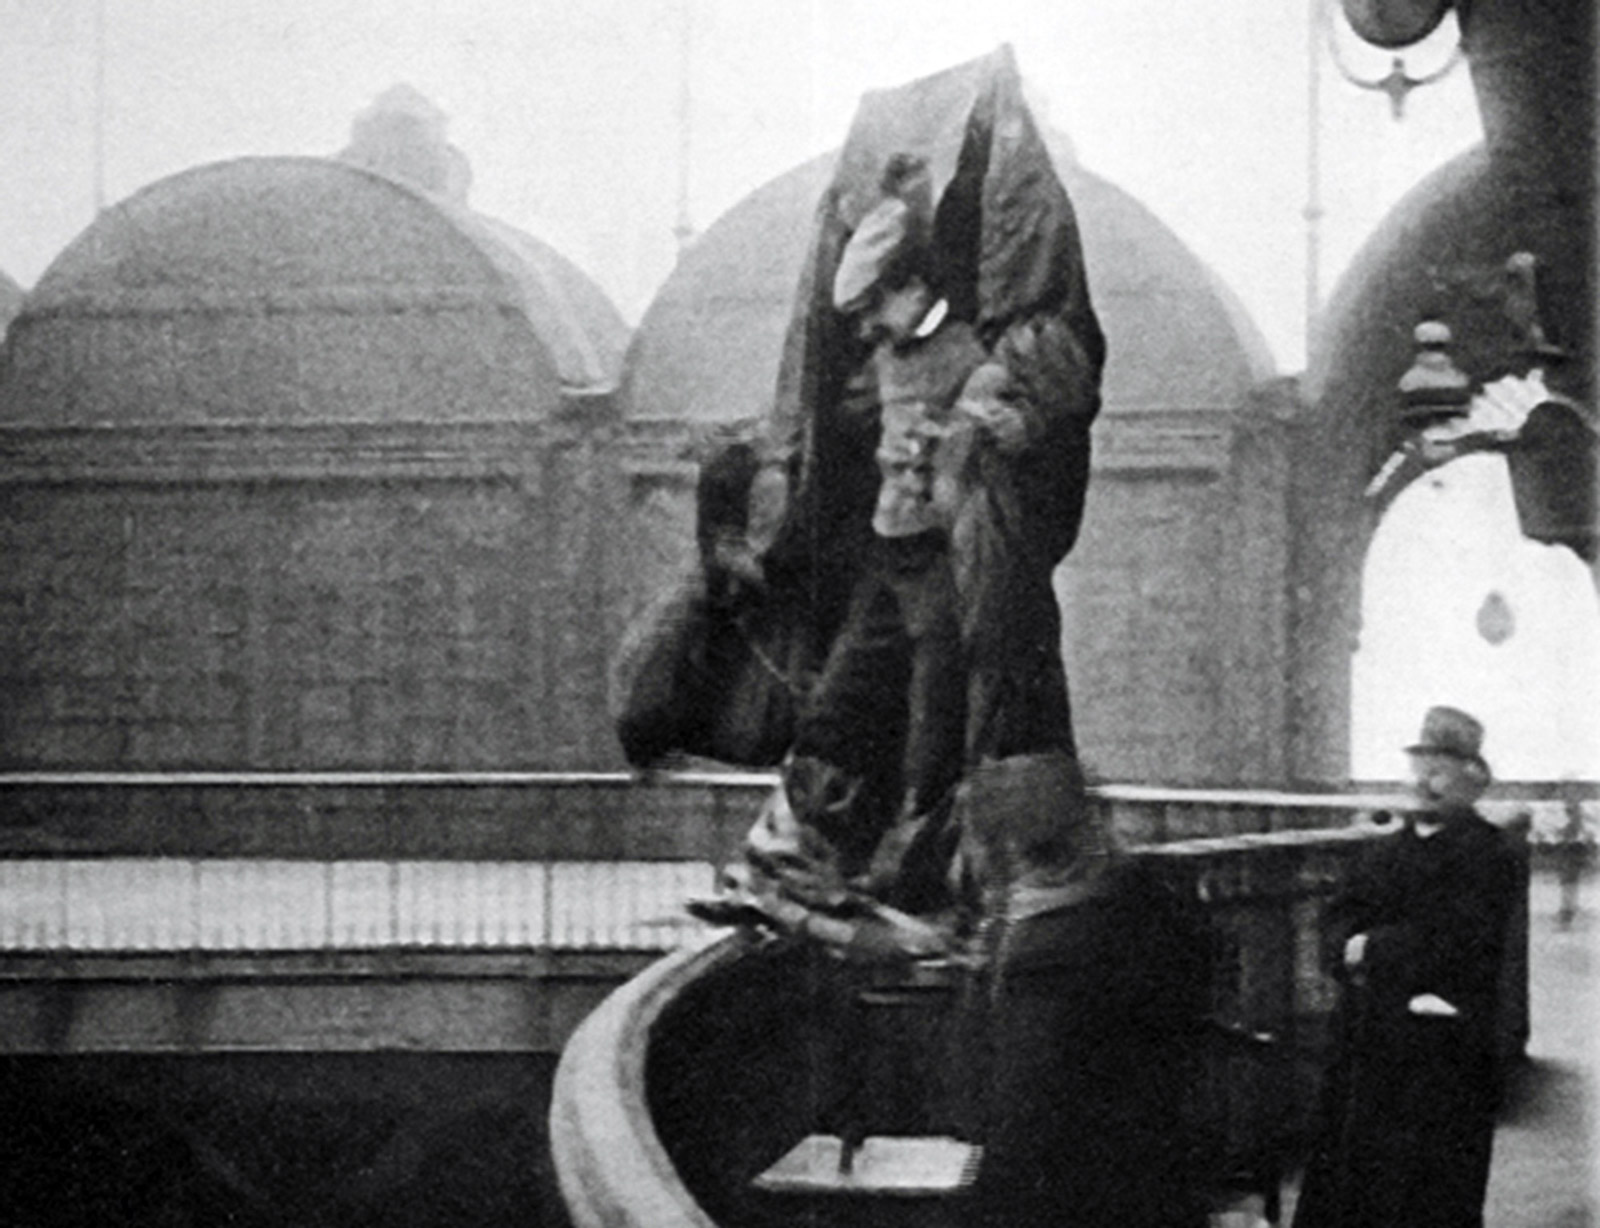 A photograph of Franz Reichelt stepping off the observation deck of the Eiffel Tower.